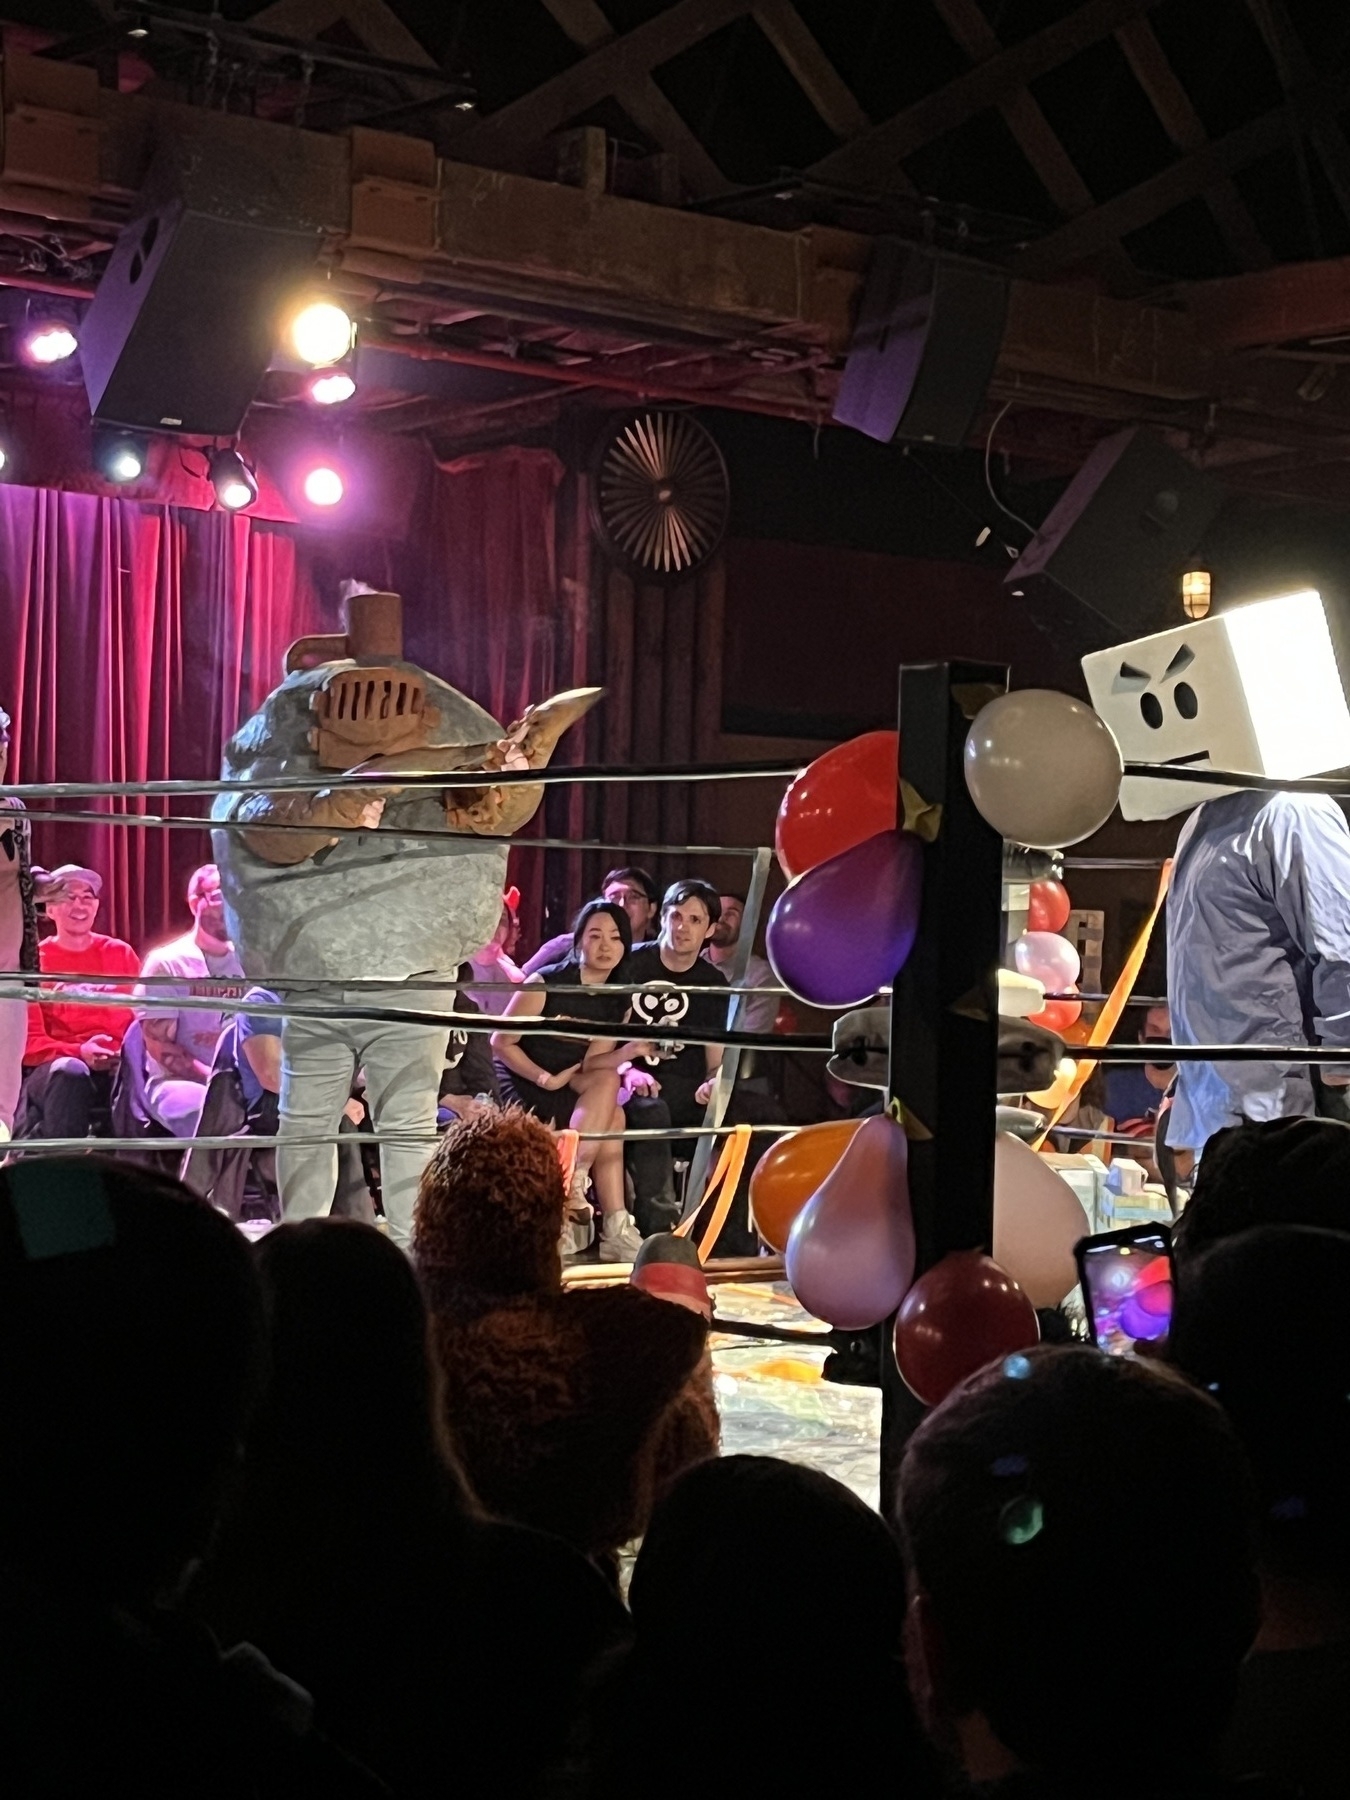 A wrestling ring with two people in costumes of giant monsters. One is wearing scrubs and a box on his head painted like a comic face, eyebrows downturned. The other is dressed as a boulder with two tentacles for arms. The boulder has a furnace grill for a face and a smokestack. 